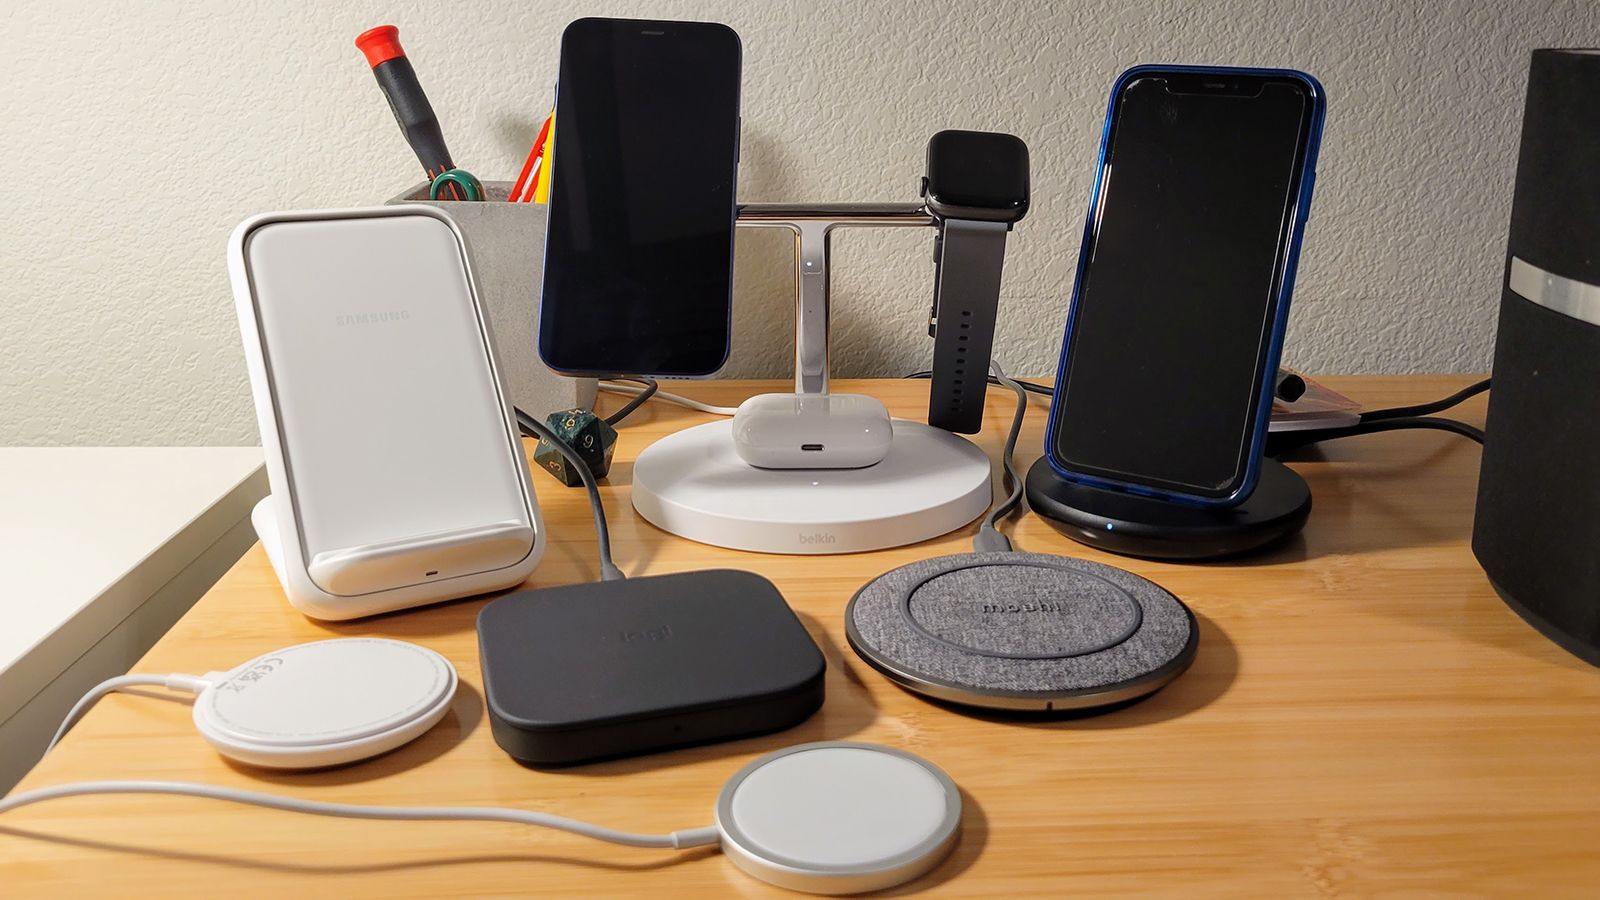 Get The Multi-Device Wireless Charger For Under $40 And Keep Your Devices Powered Up On The Go